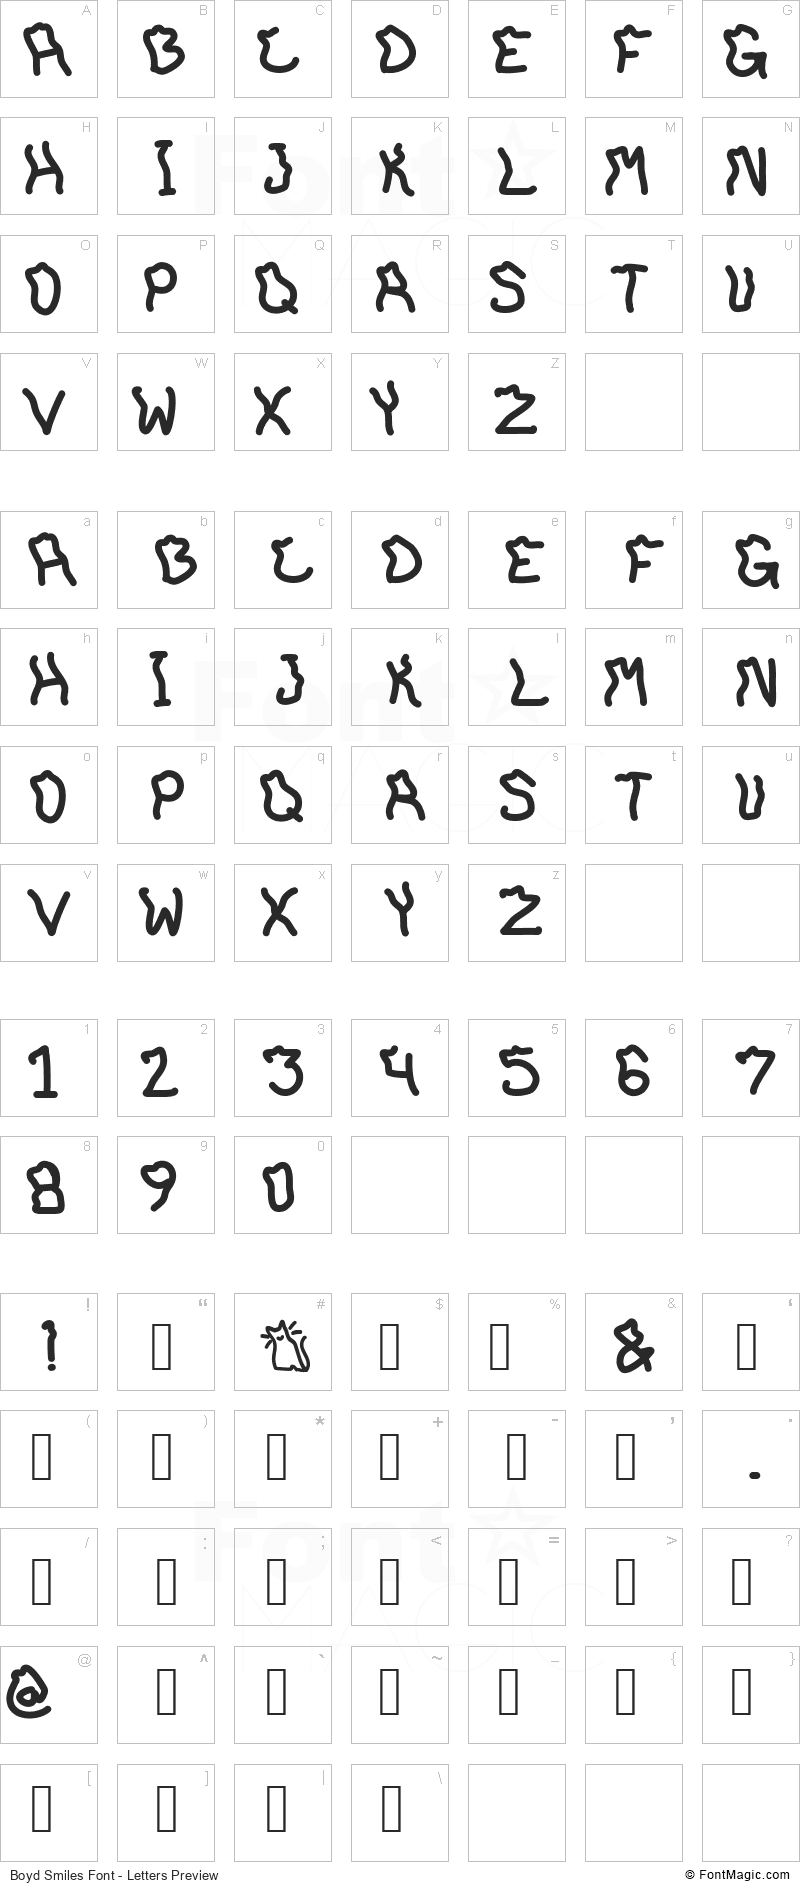 Boyd Smiles Font - All Latters Preview Chart